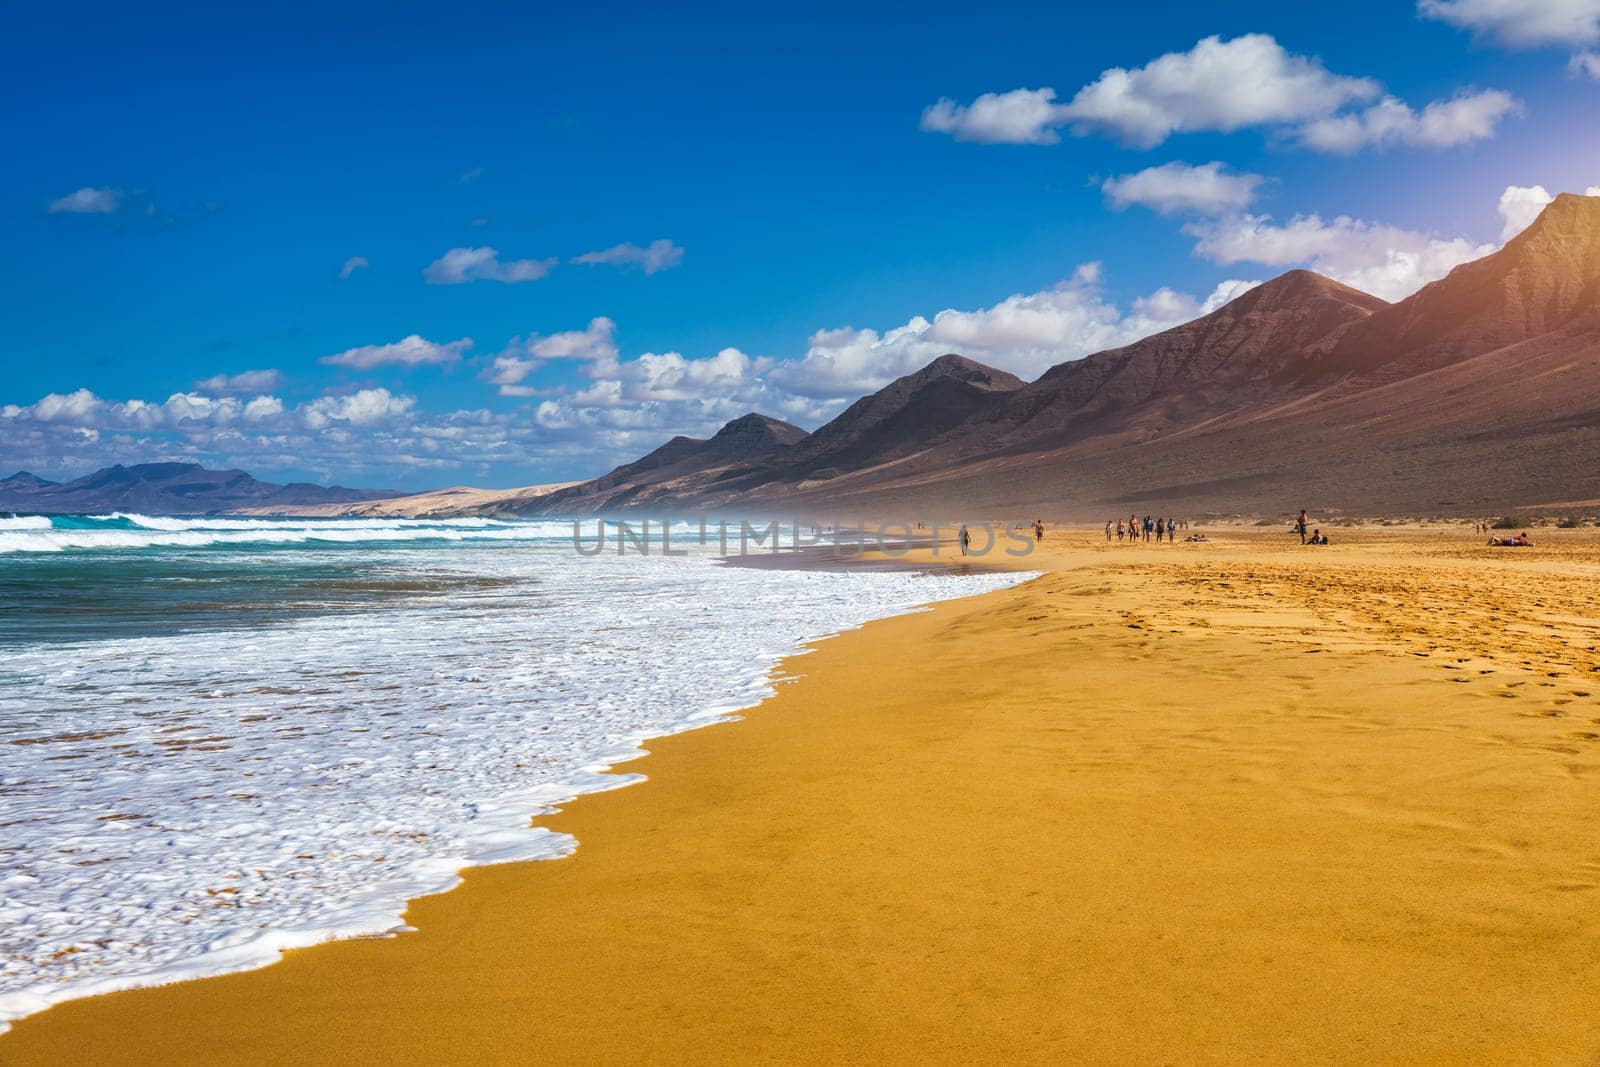 Amazing Cofete beach with endless horizon. Volcanic hills in the background and Atlantic Ocean. Cofete beach, Fuerteventura, Canary Islands, Spain. Playa de Cofete, Fuerteventura, Canary Islands. by DaLiu